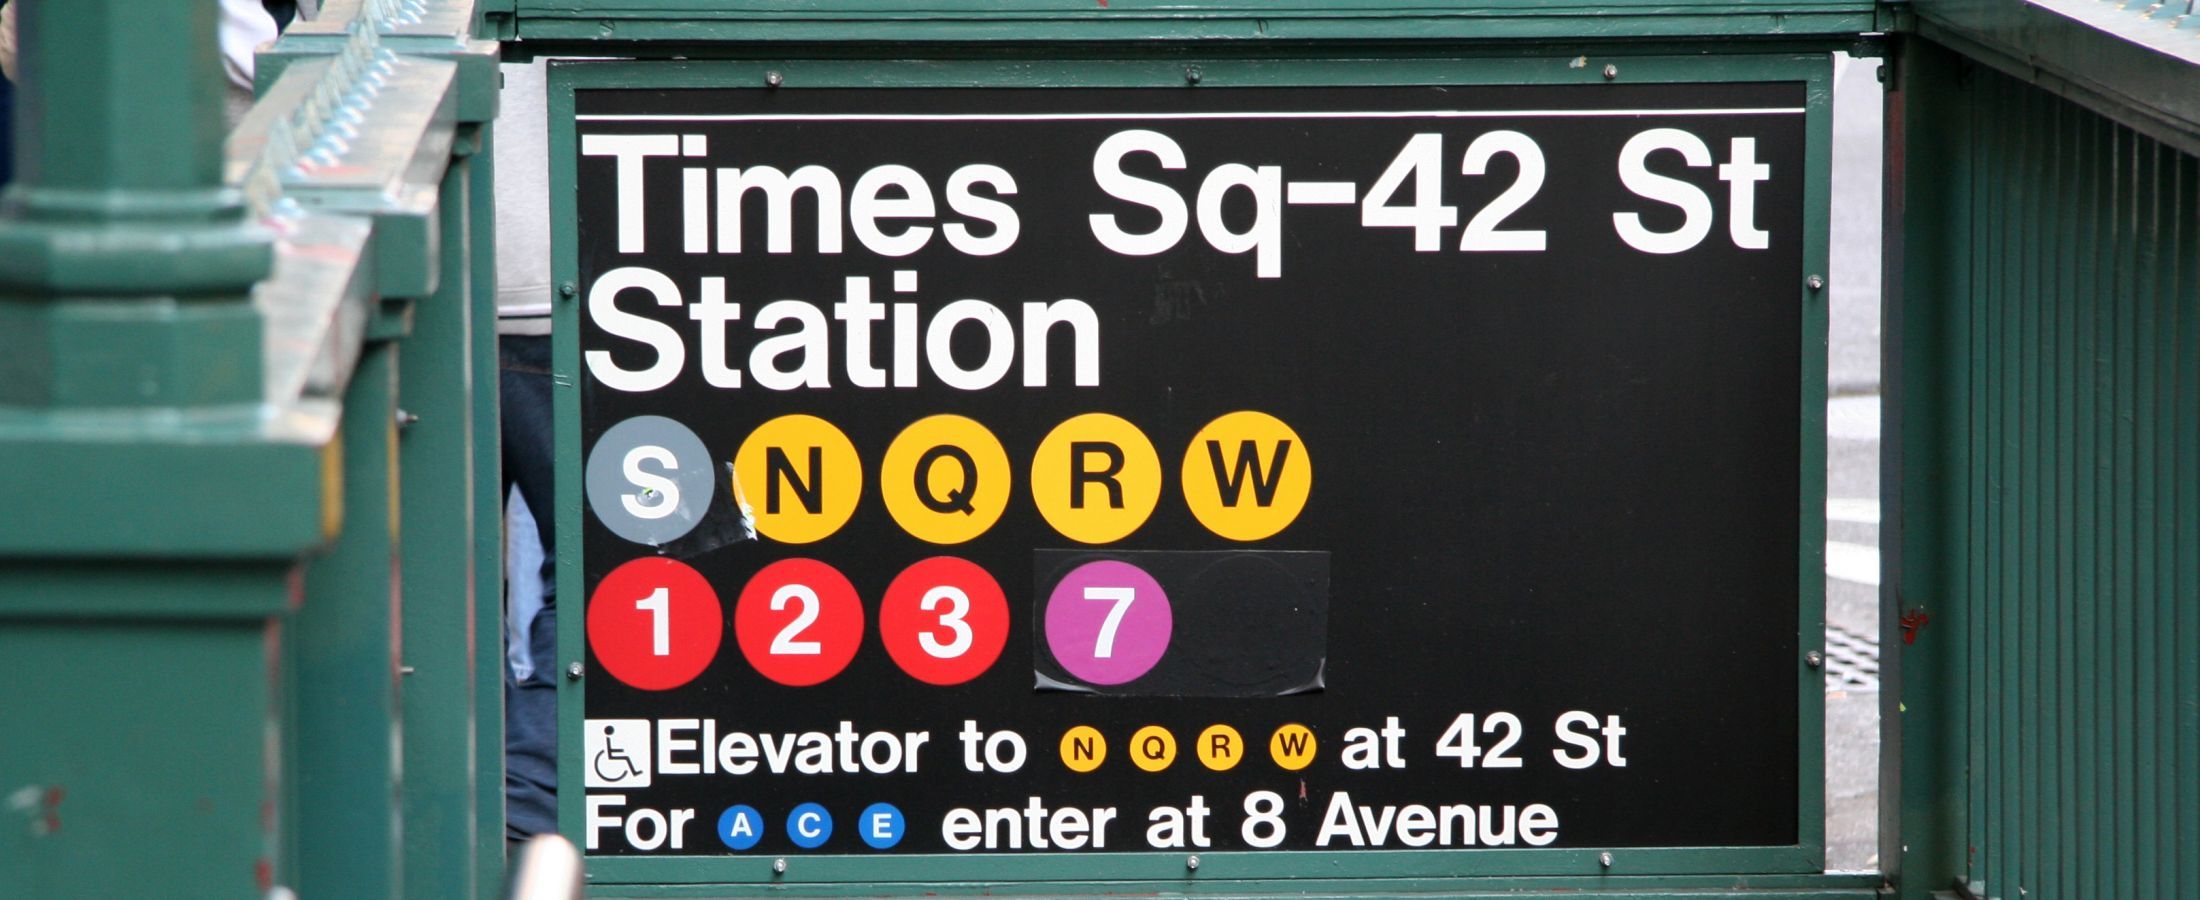 Time Square Train Station with access to the S, N, Q, R, Q, 1, 2, 3, and 7 subway lines